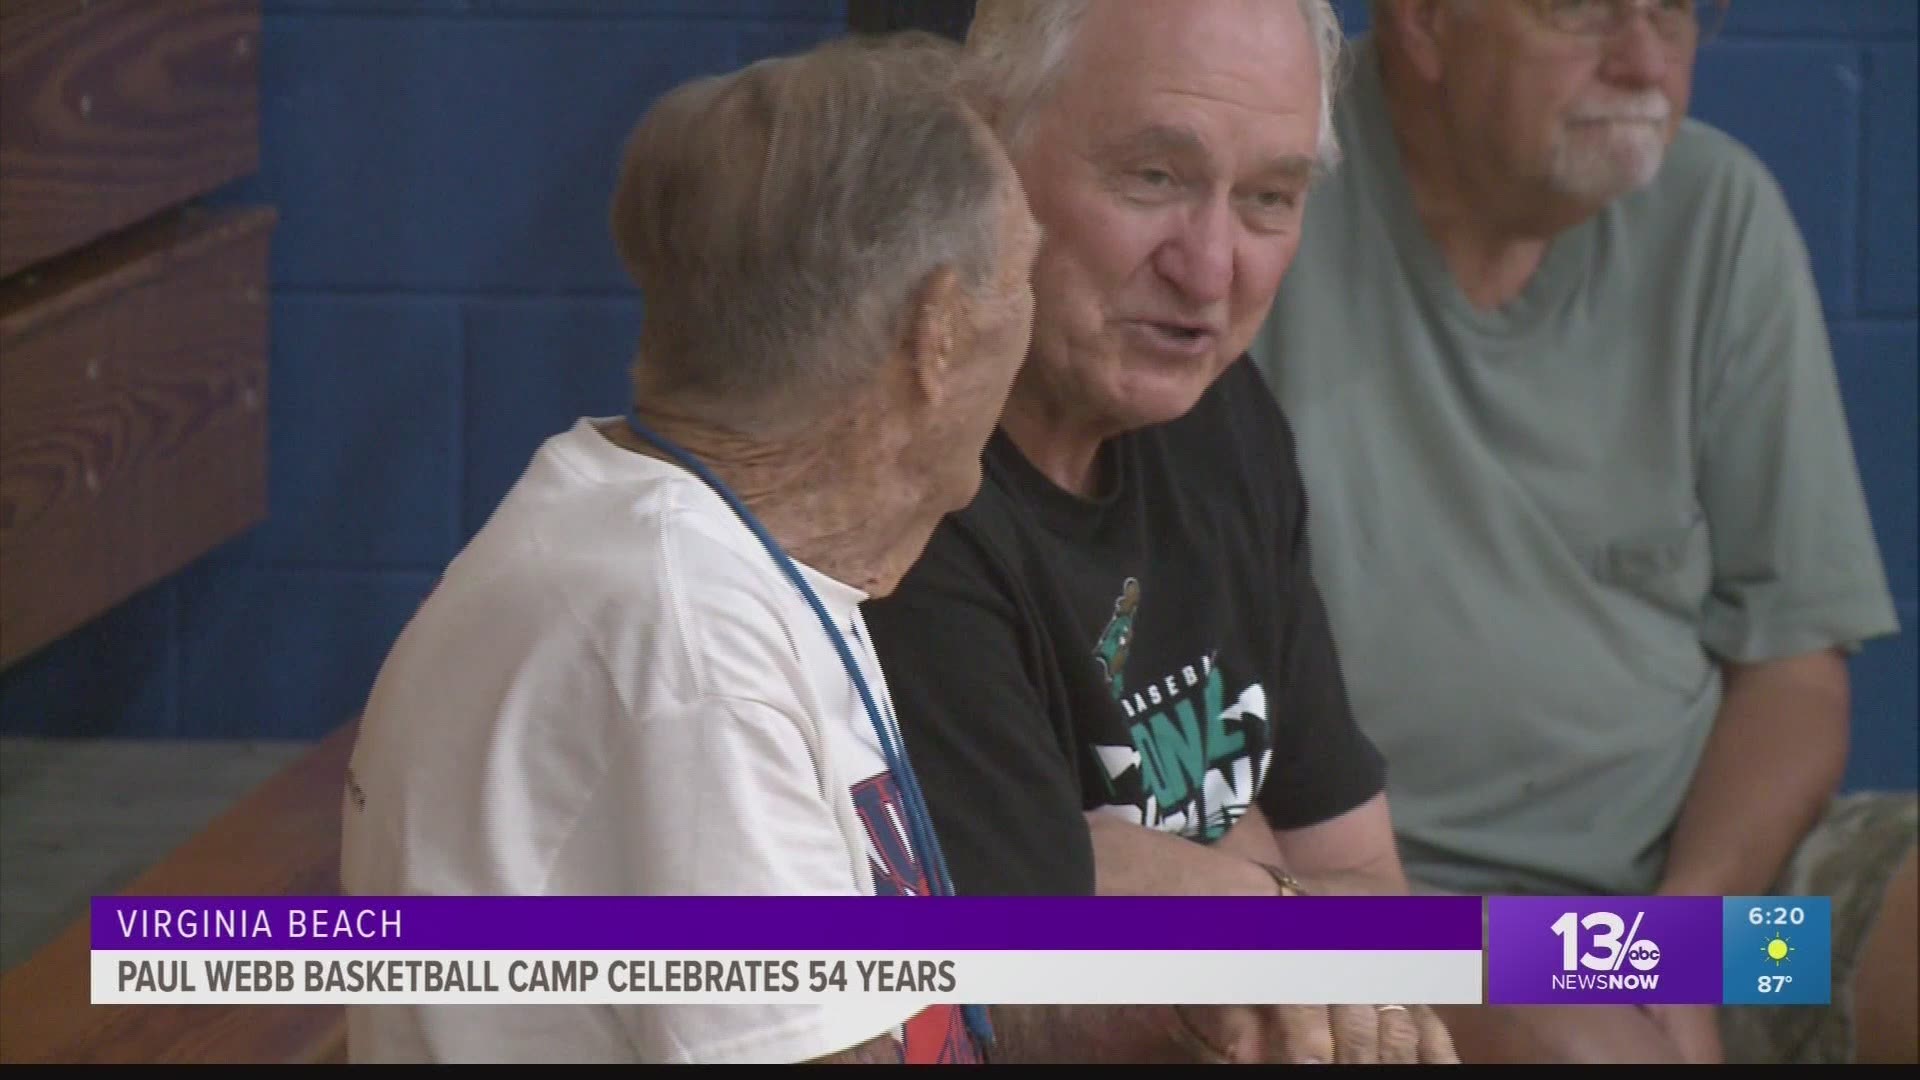 As ODU Monarchs coaching great, Paul Webb celebrates 54 years of his camp, he talks about the many campers and big name players that have come through.